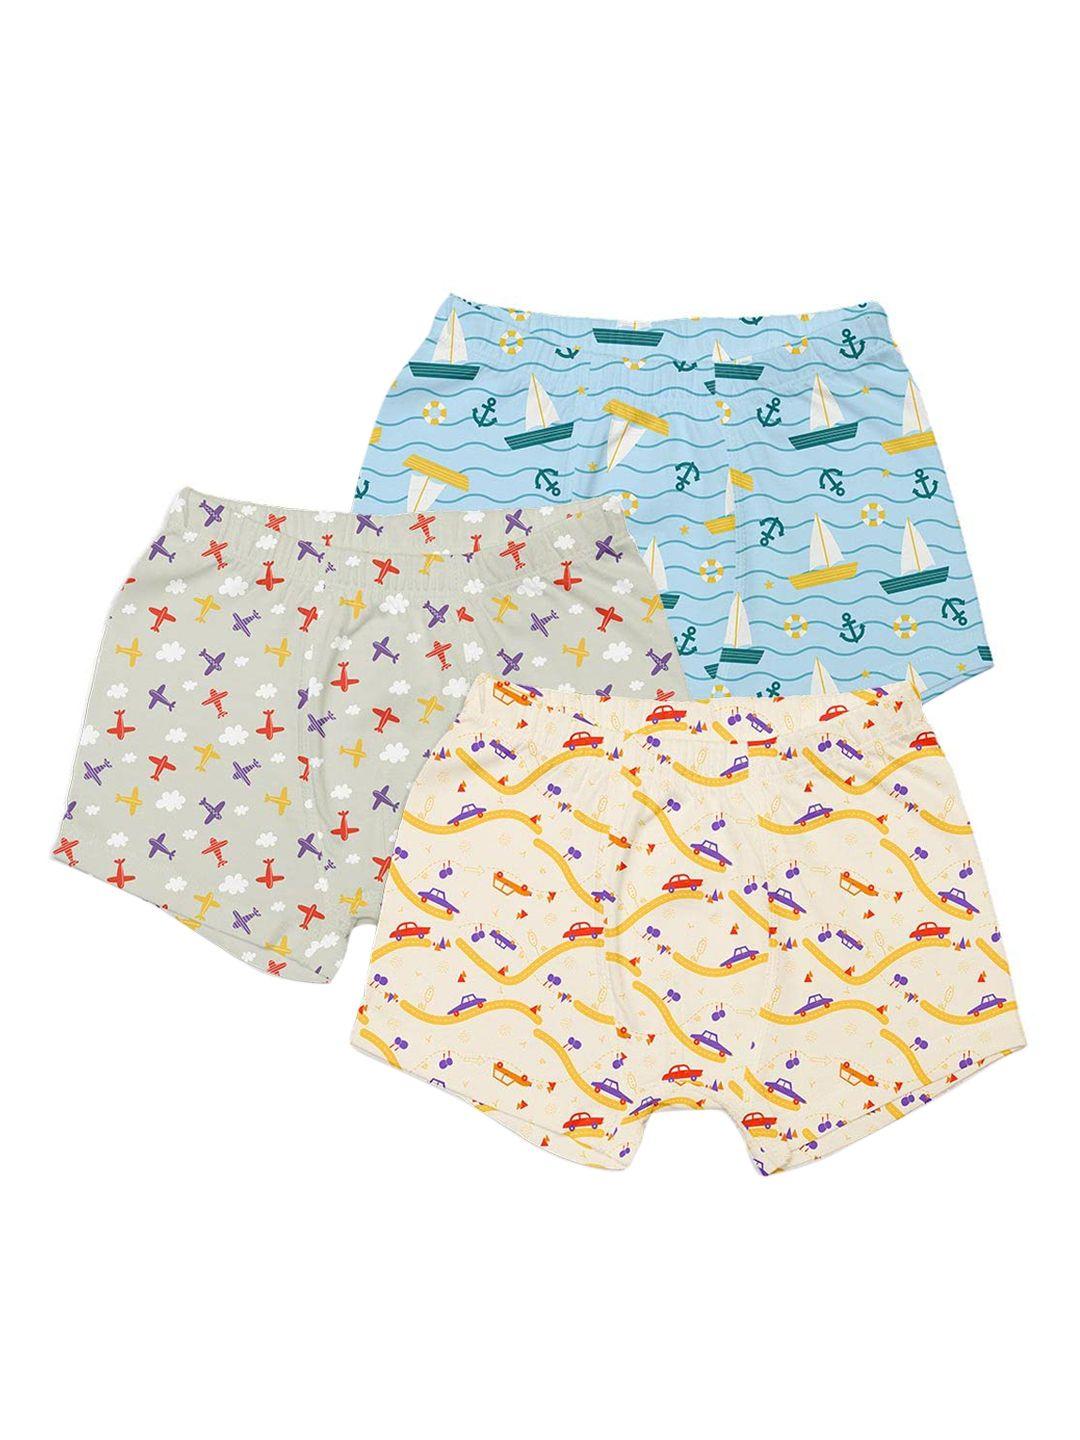 superbottoms boys pack of 3 printed sustainable trunks